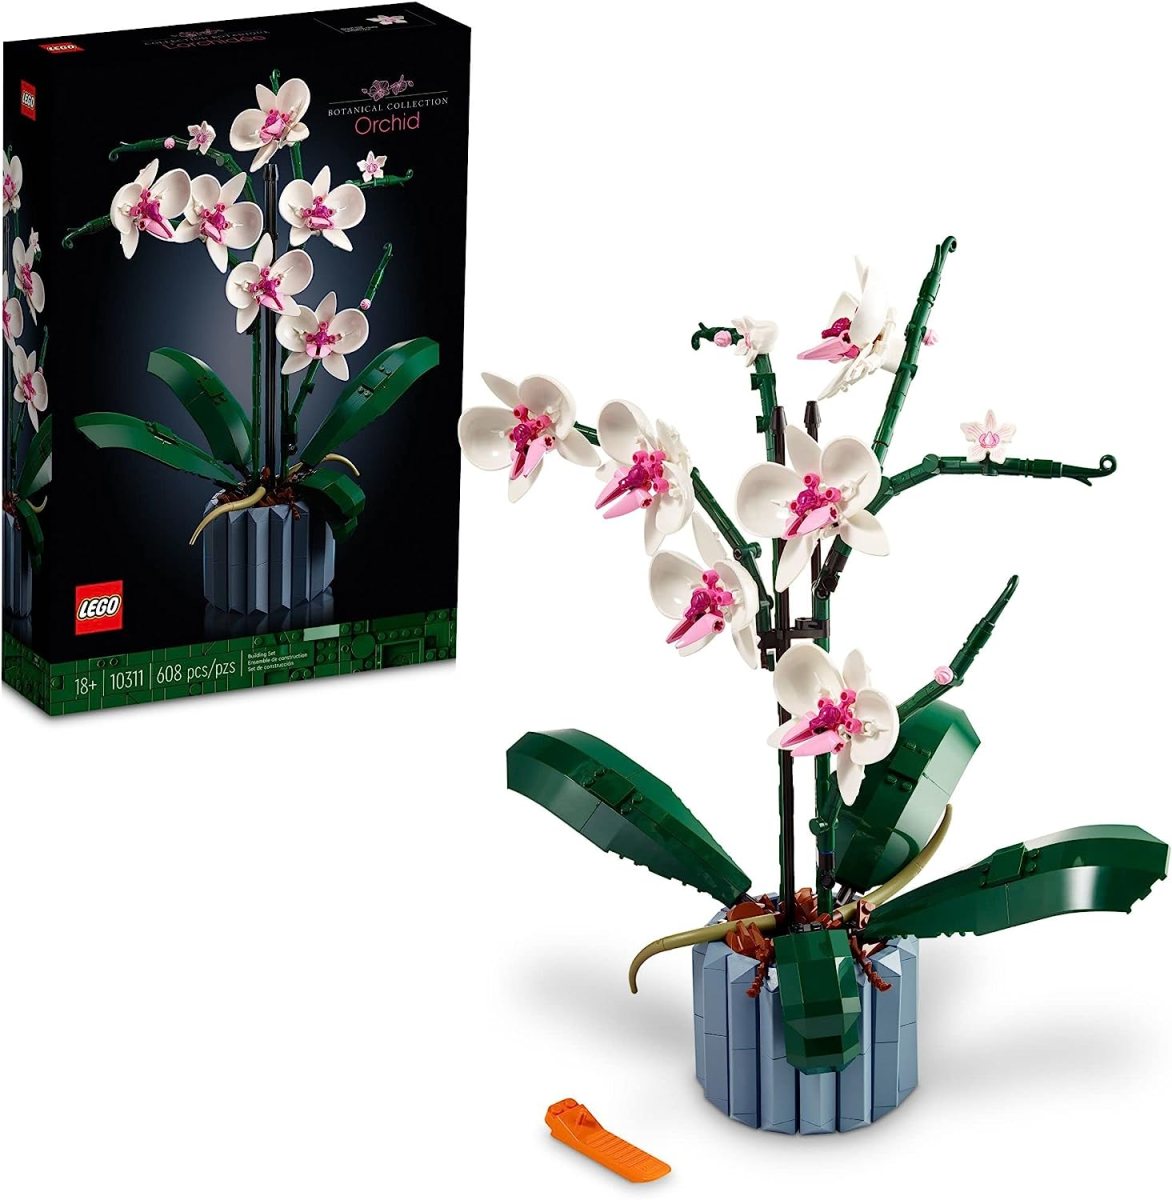 A potted orchid made of LEGO